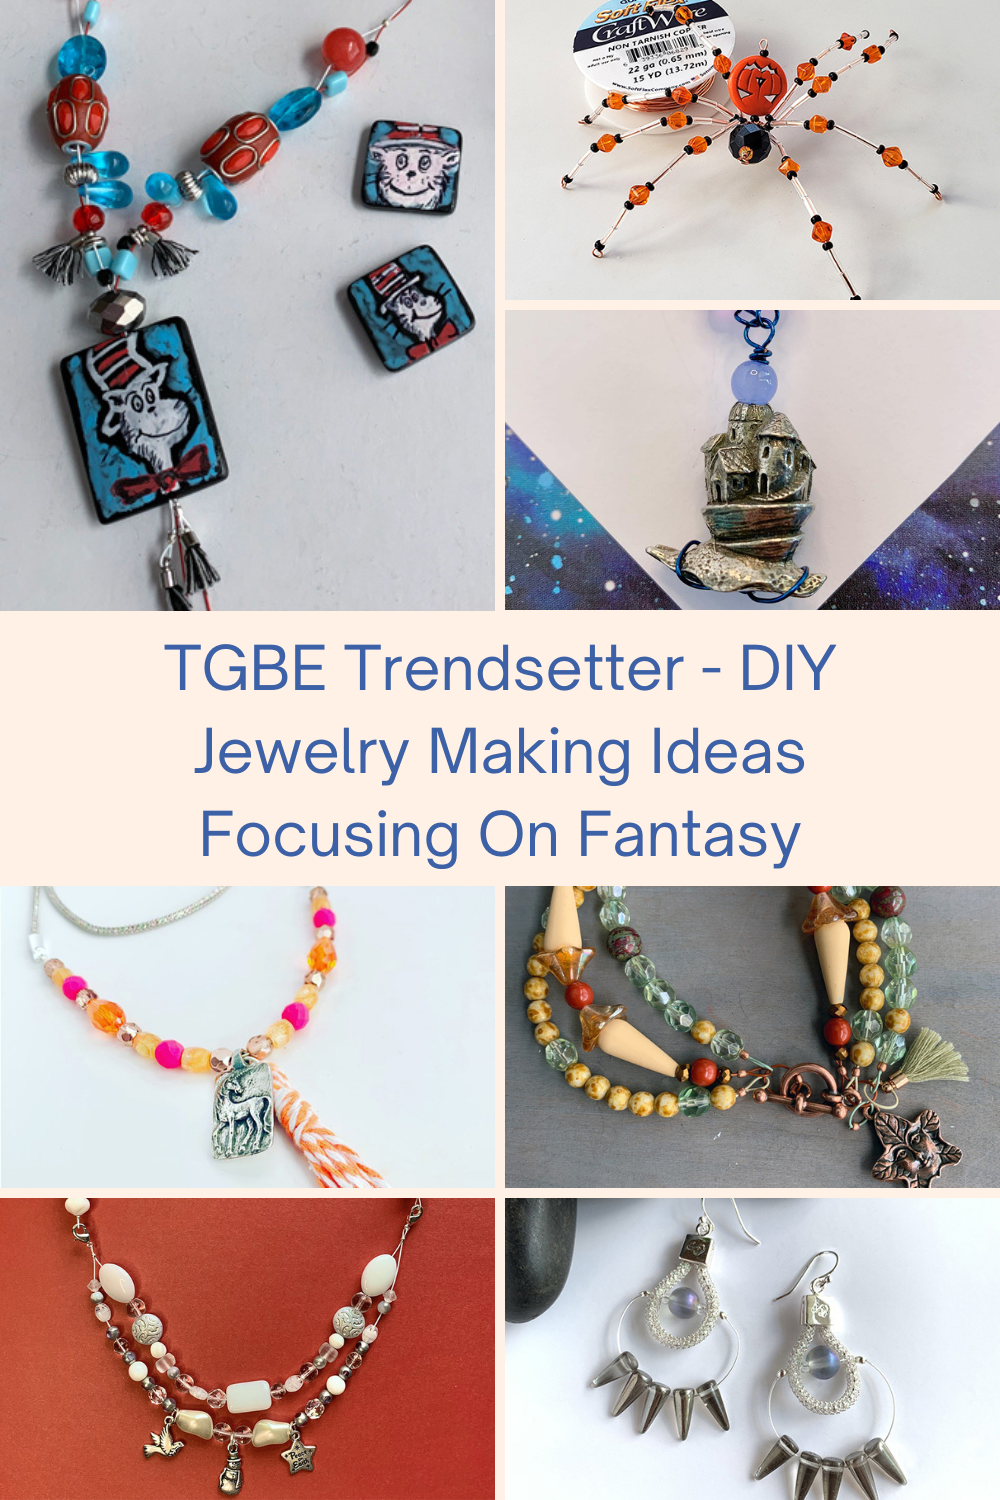 TGBE Trendsetter - DIY Jewelry Making Ideas Focusing On Fantasy Collage